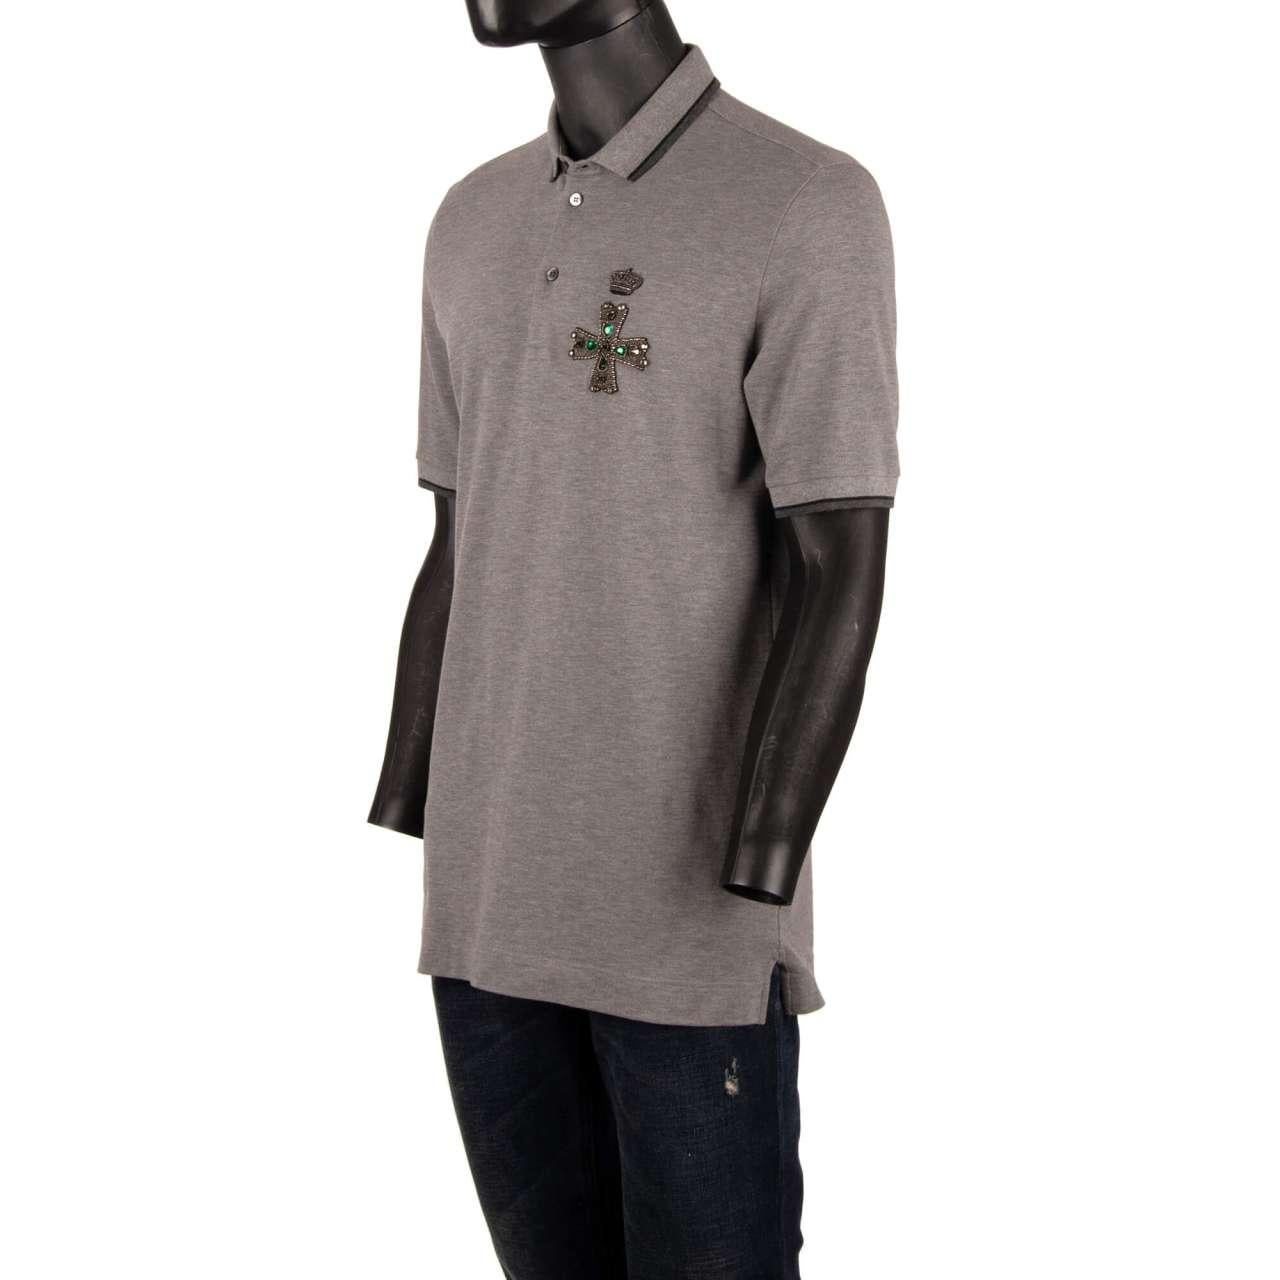 Dolce & Gabbana - Cotton Polo Shirt with Embroidered Crystals Cross Gray 48 M In Excellent Condition For Sale In Erkrath, DE